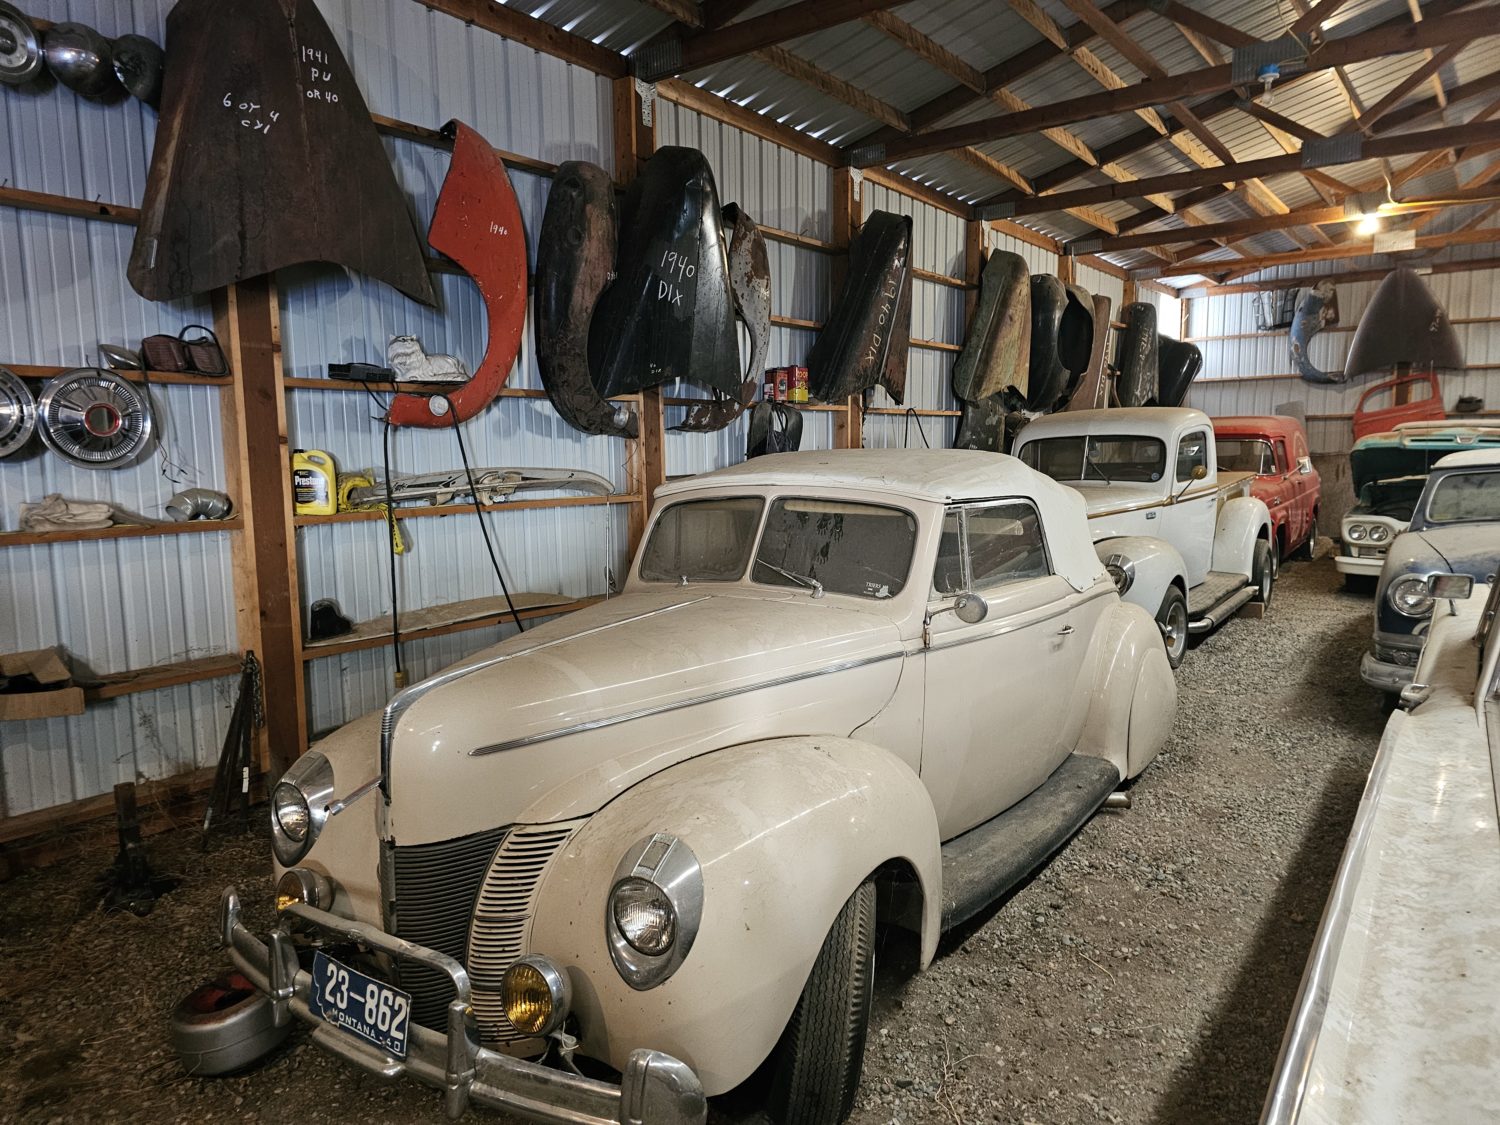 1940 Ford Cars, Parts & More! The Willie Shields Collection! Live Onsite-With Online Bidding - image 4